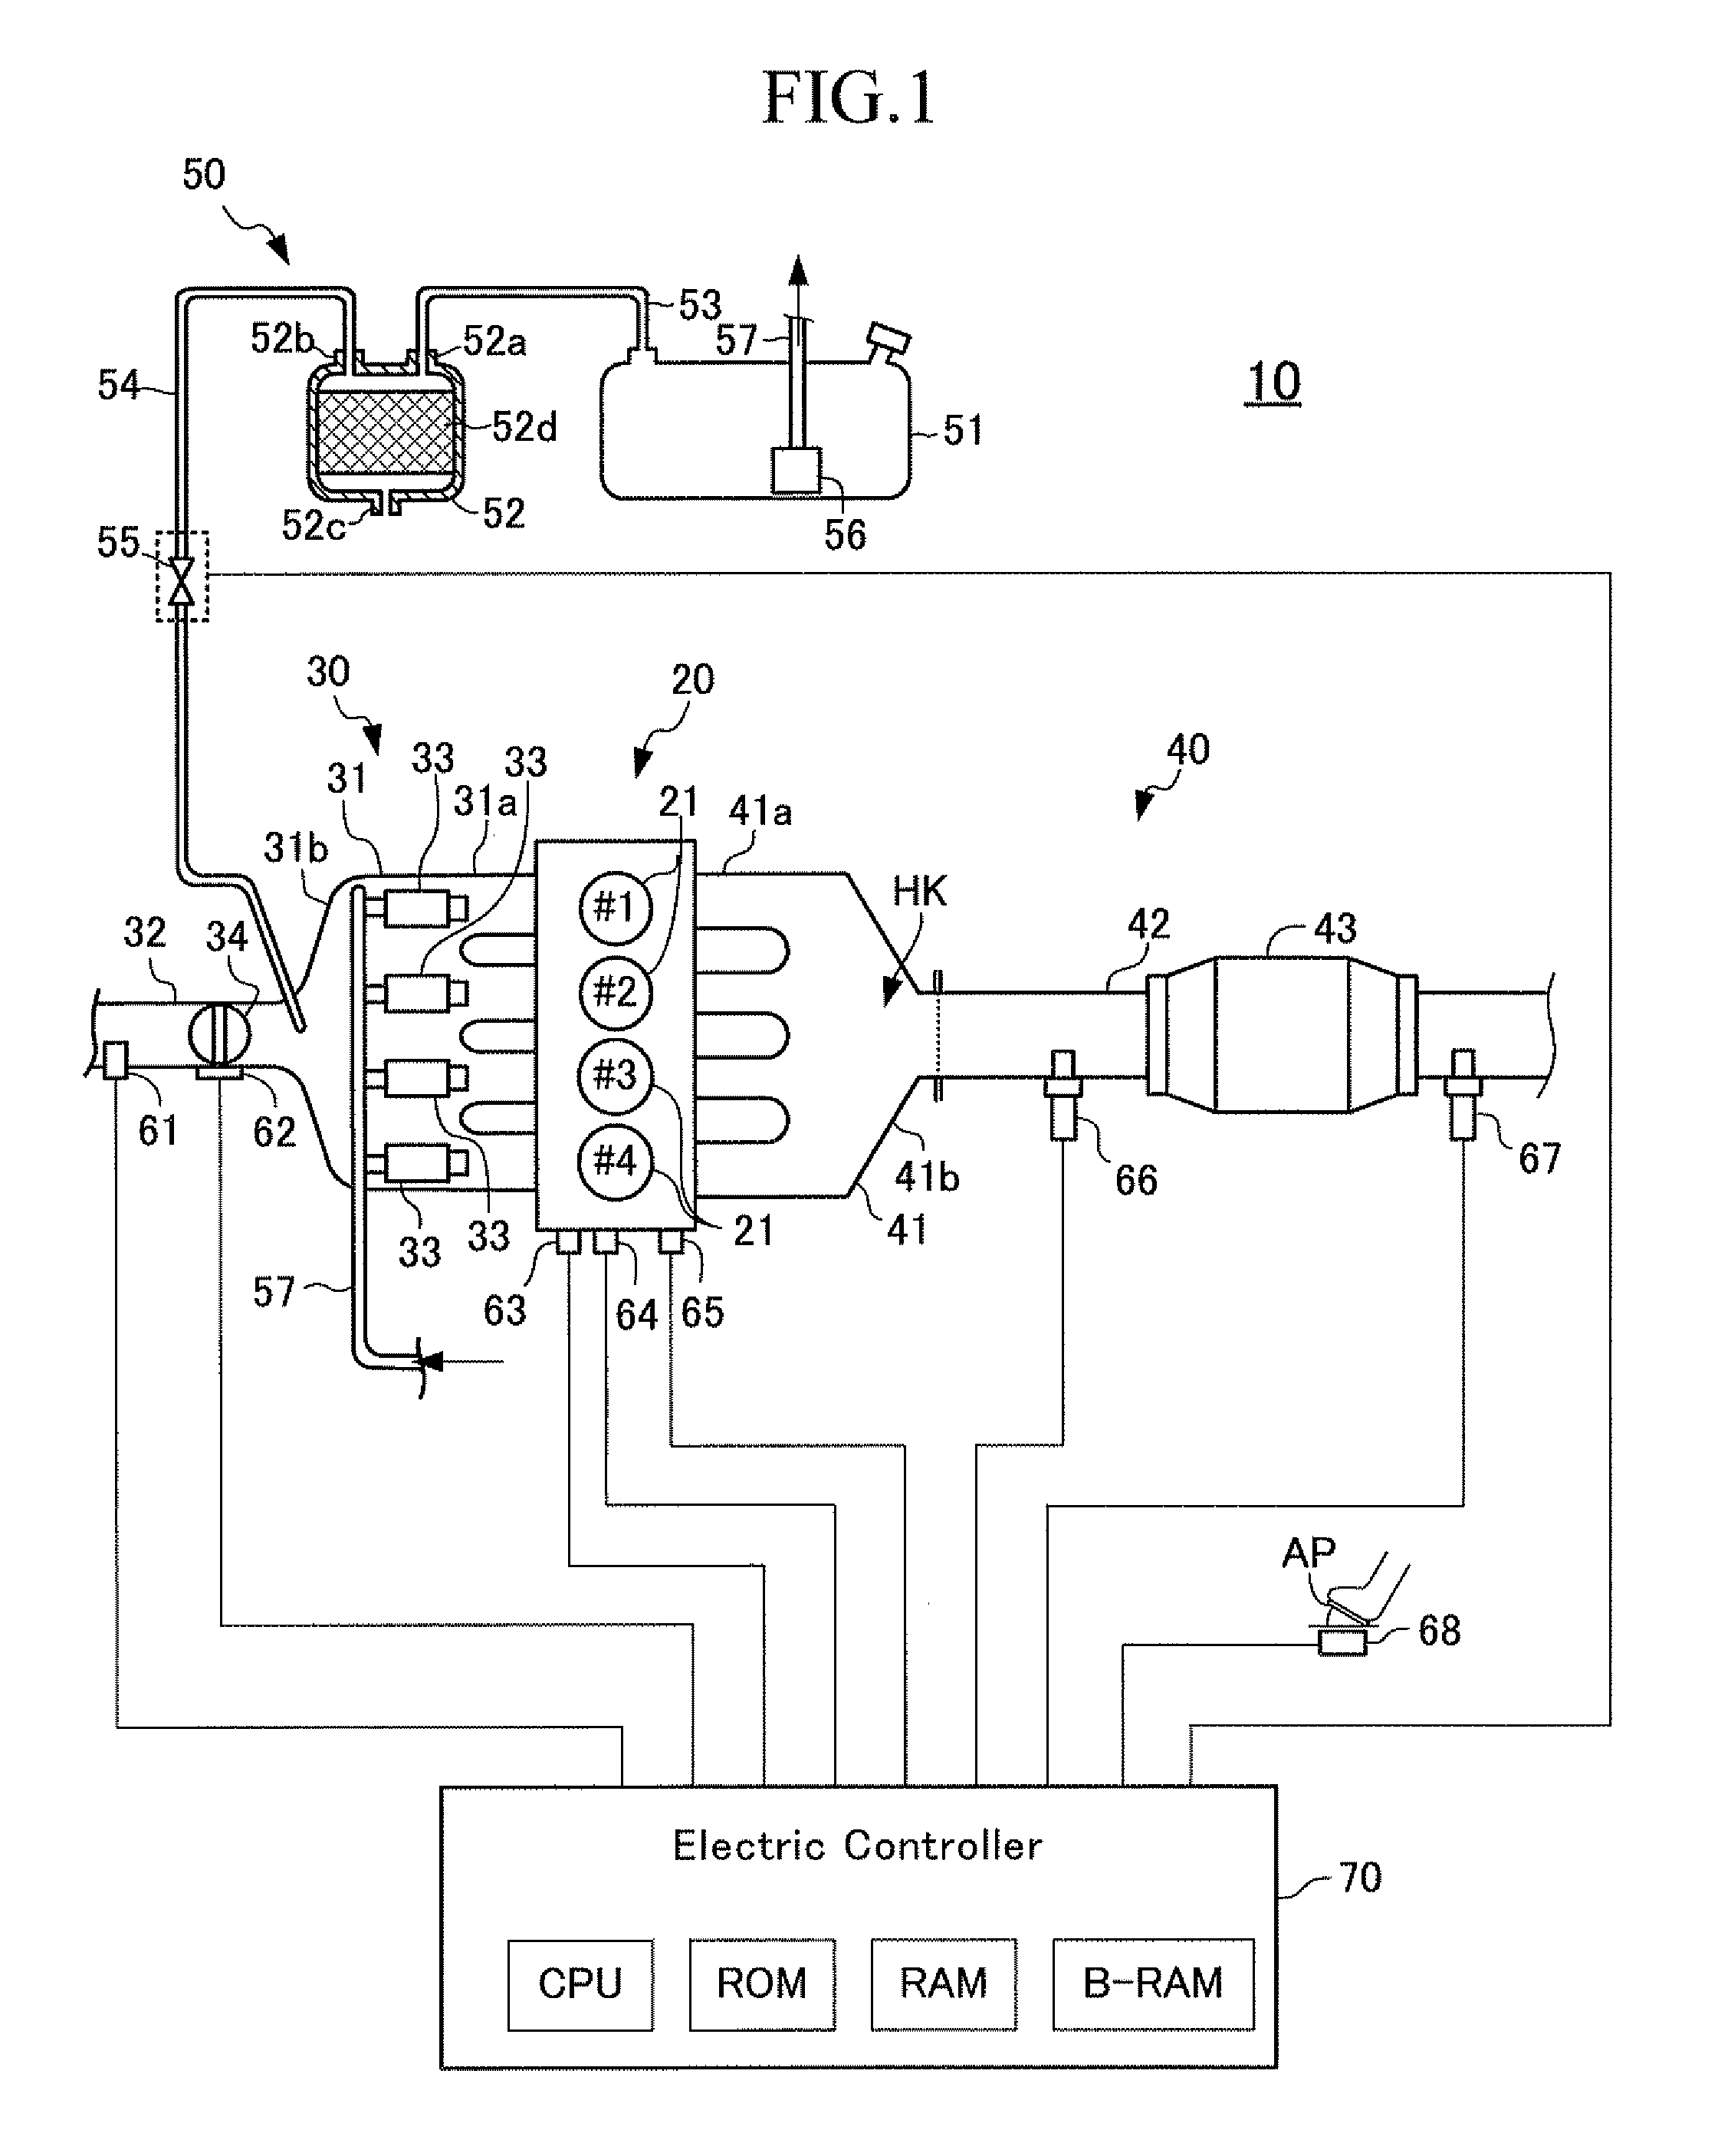 Control apparatus for an internal combustion engine